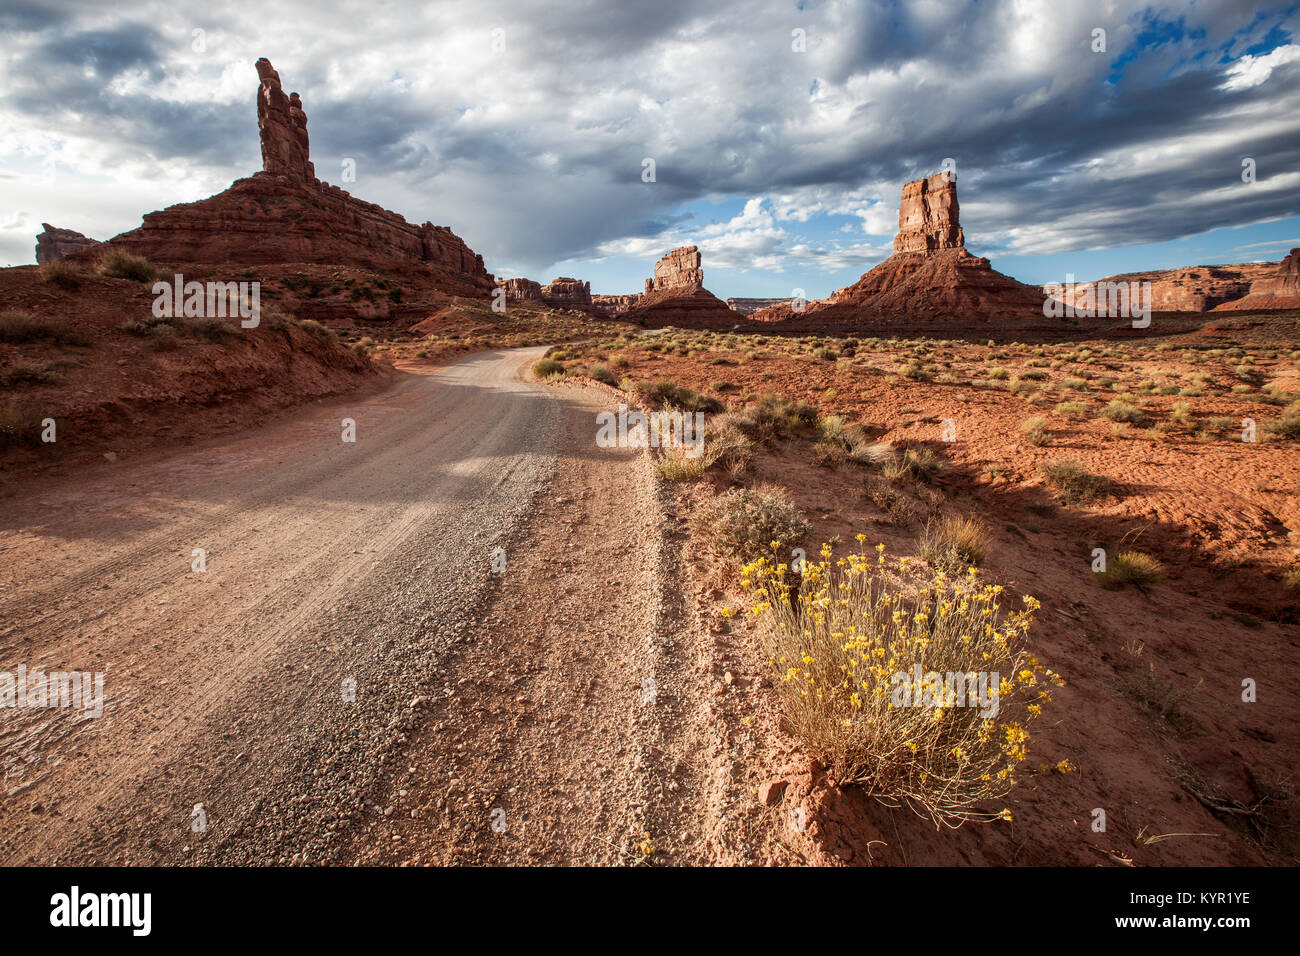 The road thru the Valley of the Gods, Utah Stock Photo